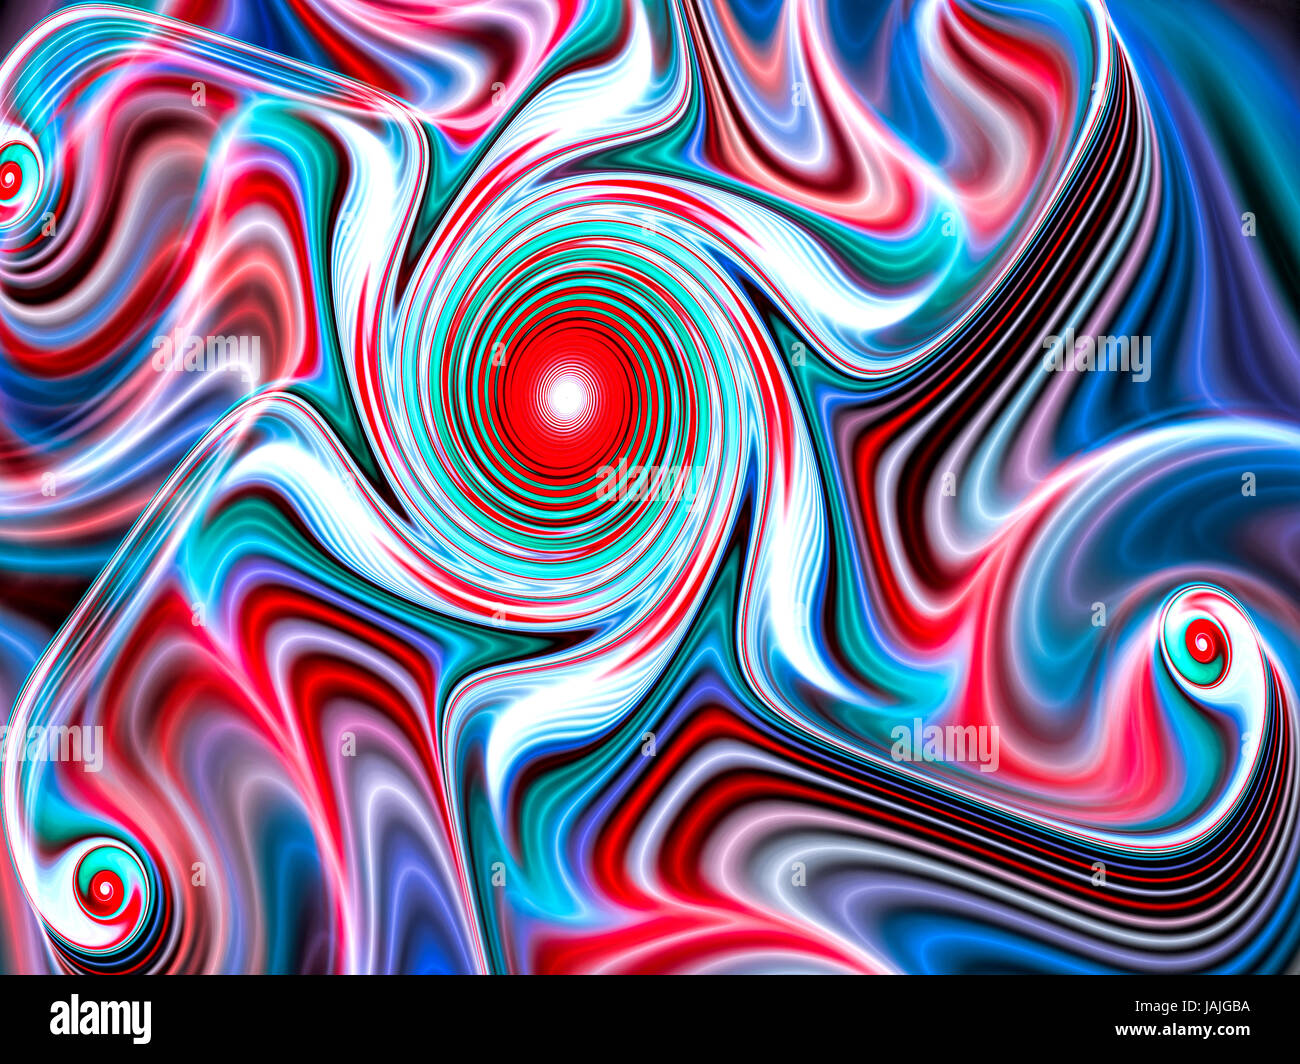 Bizarre background - abstract computer-generated image. Fractal geometry: curved, distorted waves and spirals. For backdrops, web design, covers. Stock Photo